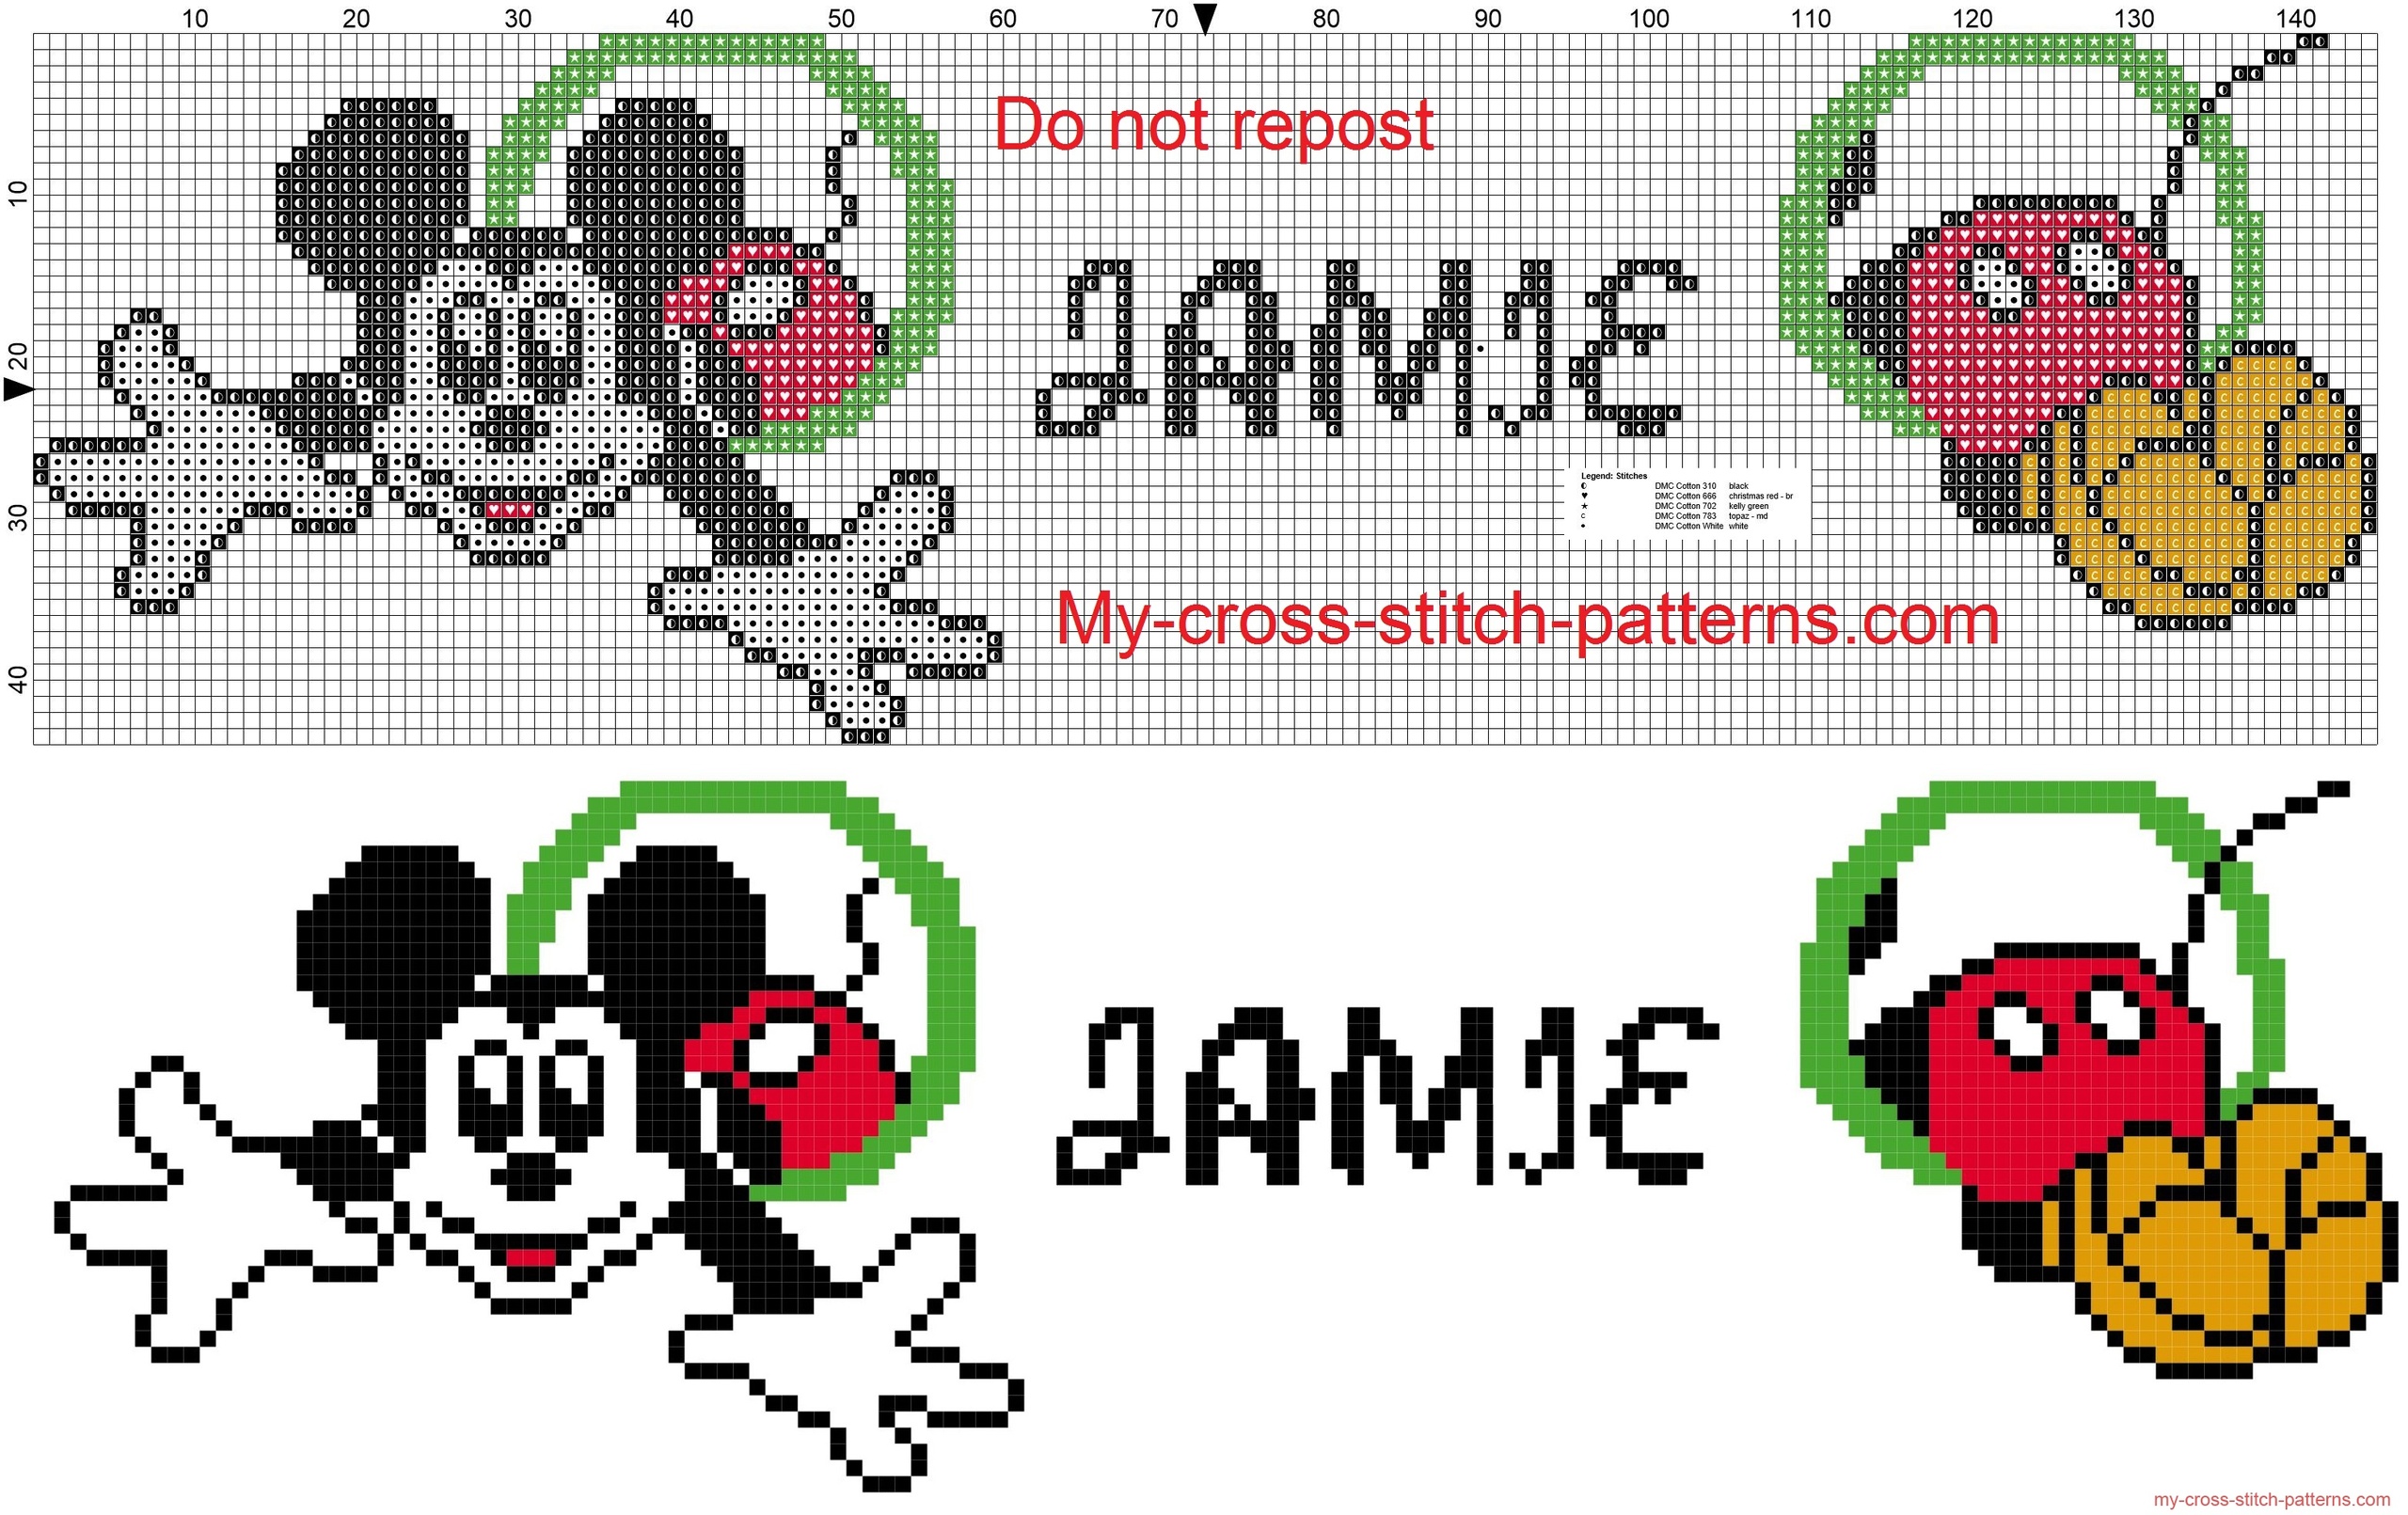 jamie_name_whit_mickey_mouse_cross_stitch_patterns_free